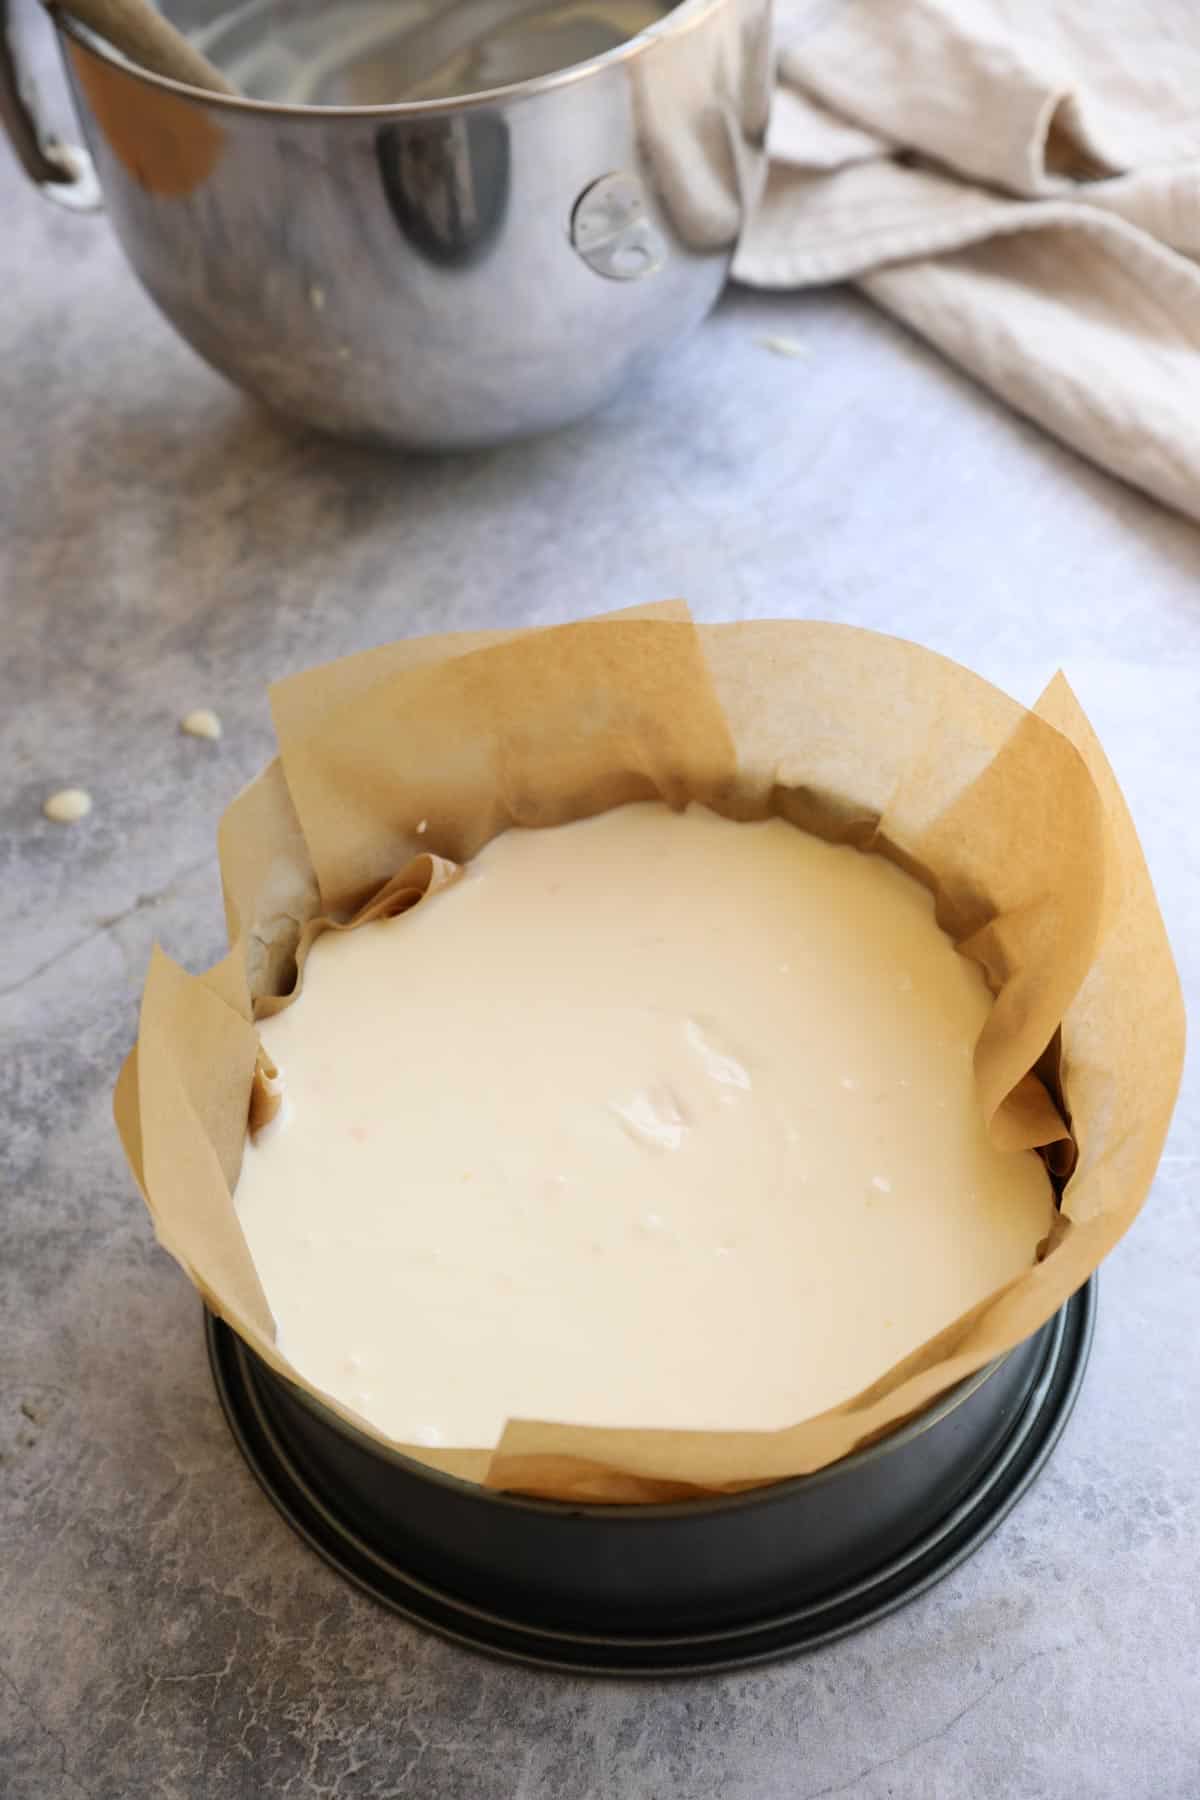 a cheesecake pan lined with parchment paper, filled with batter and a silver mixing bowl